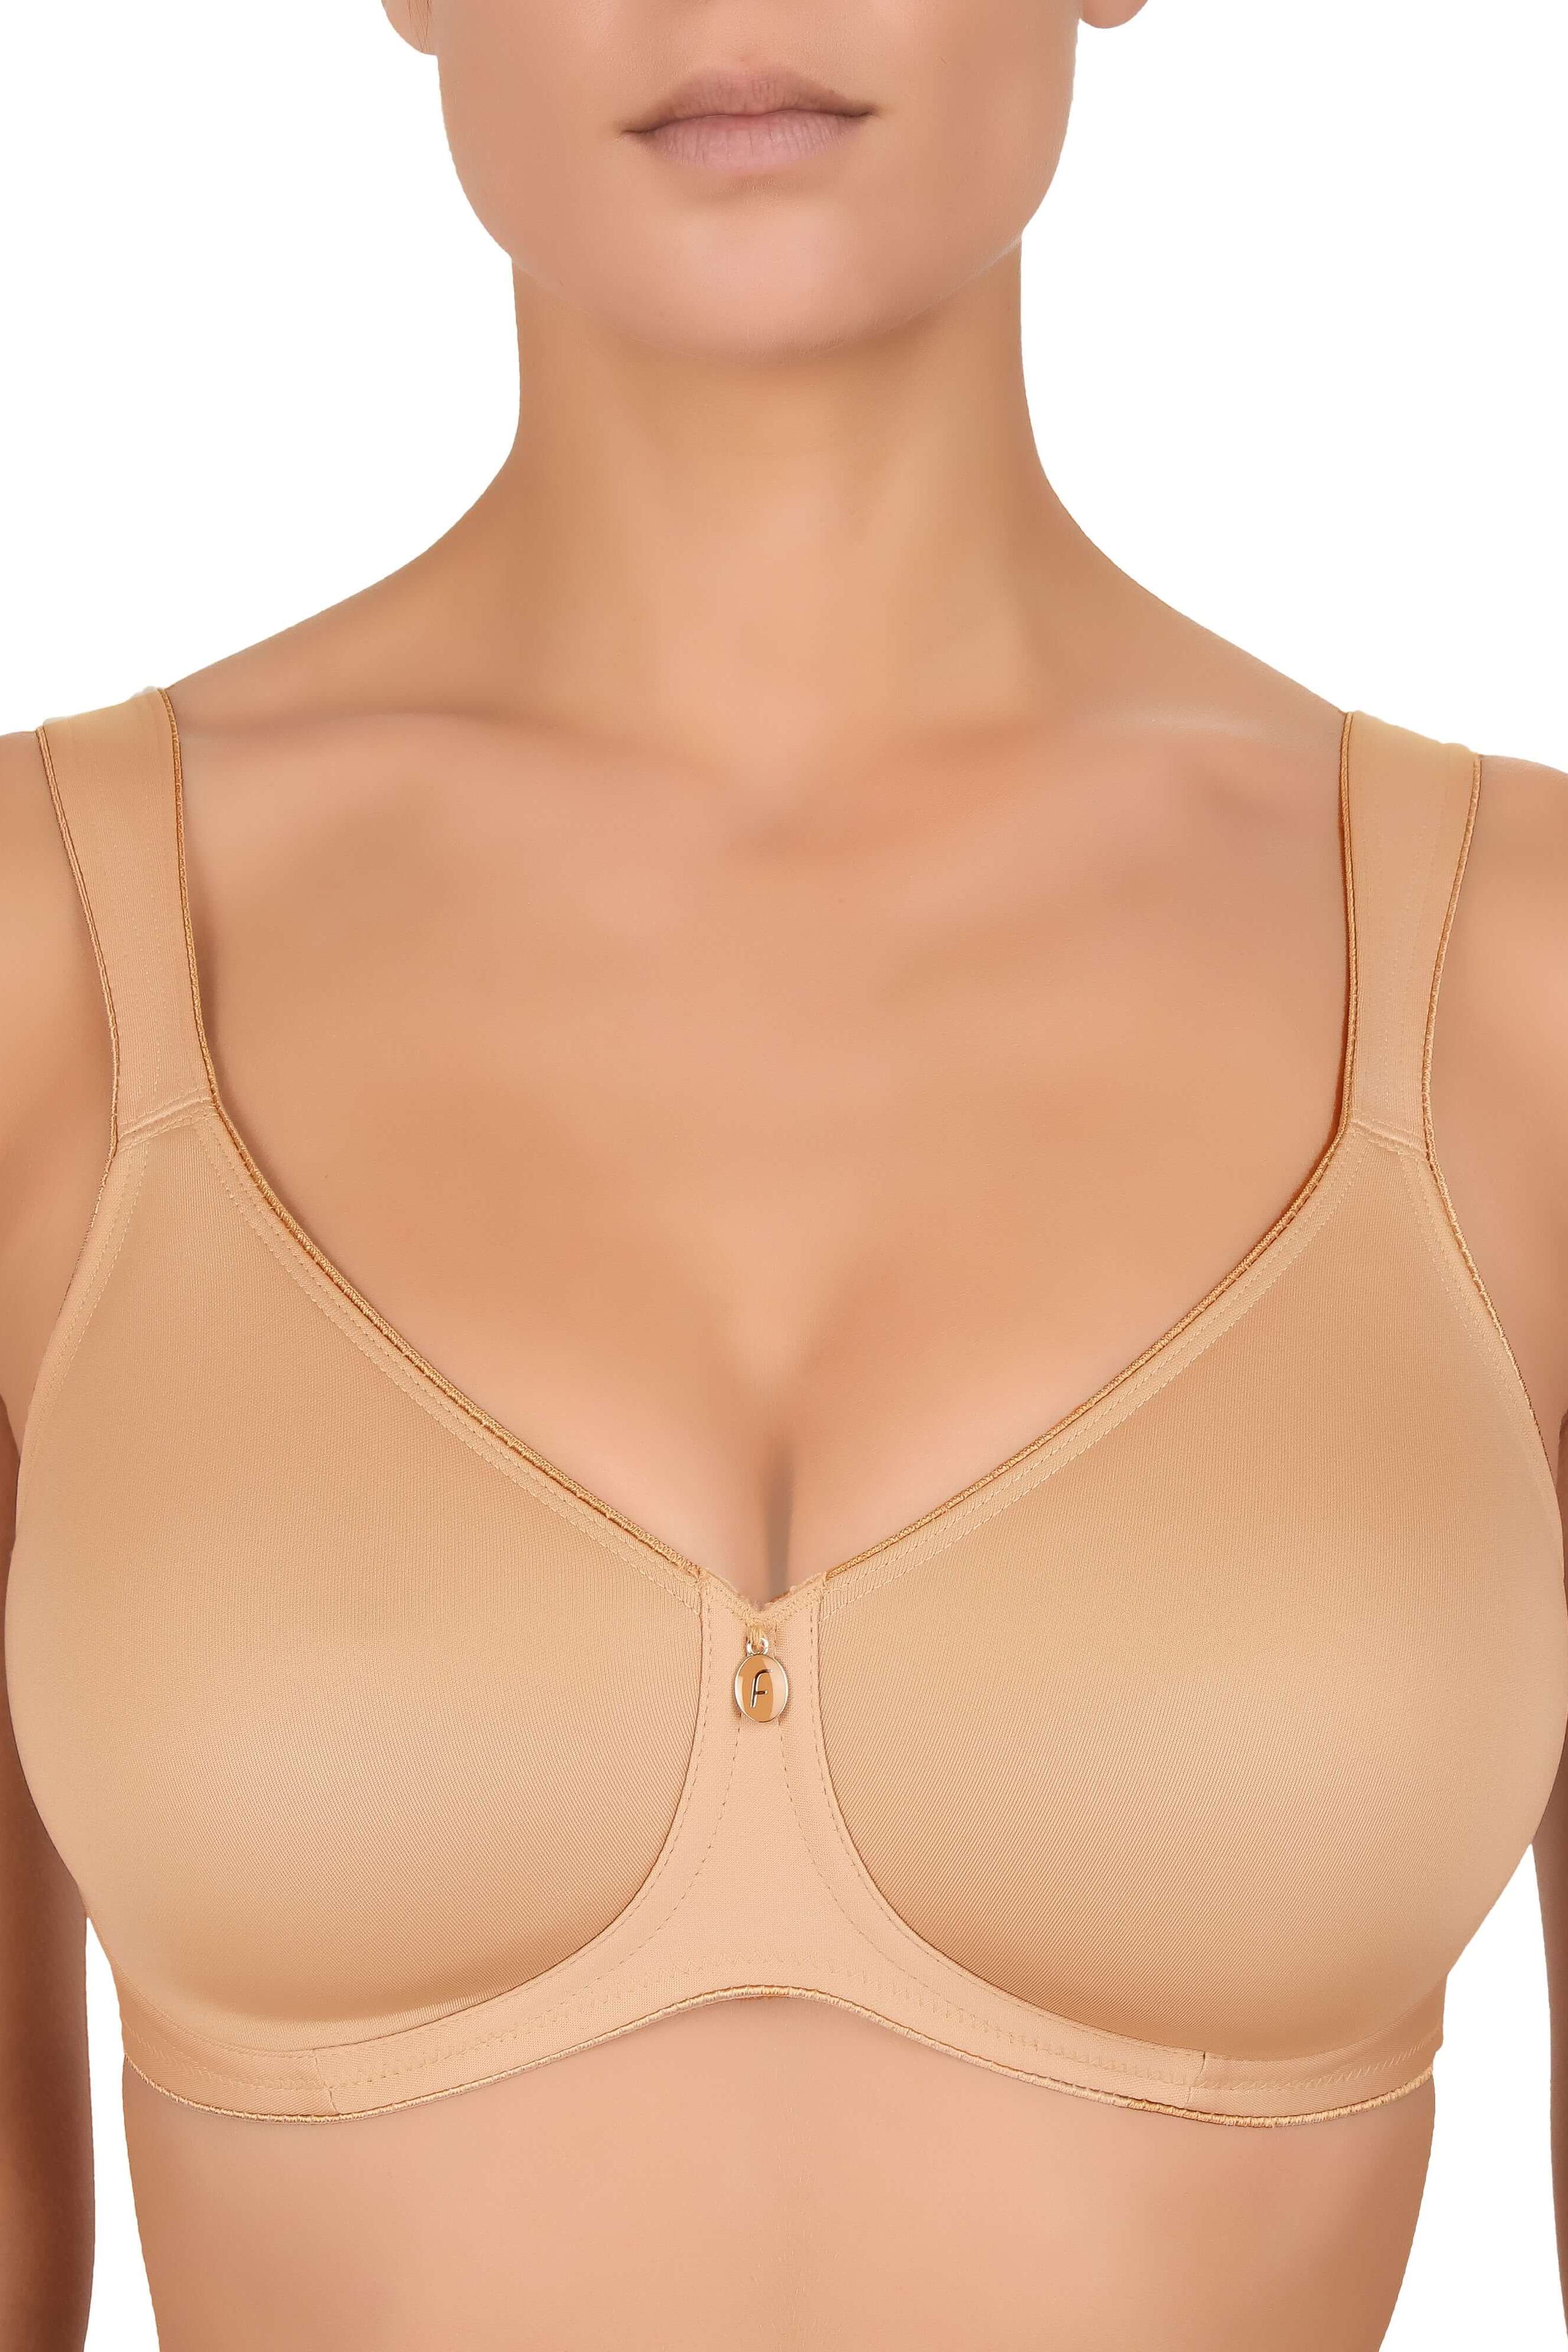 Felina Joy wired bra 030 Dark Blue buy for the best price CAD$ 109.00 -  Canada and U.S. delivery – Bralissimo